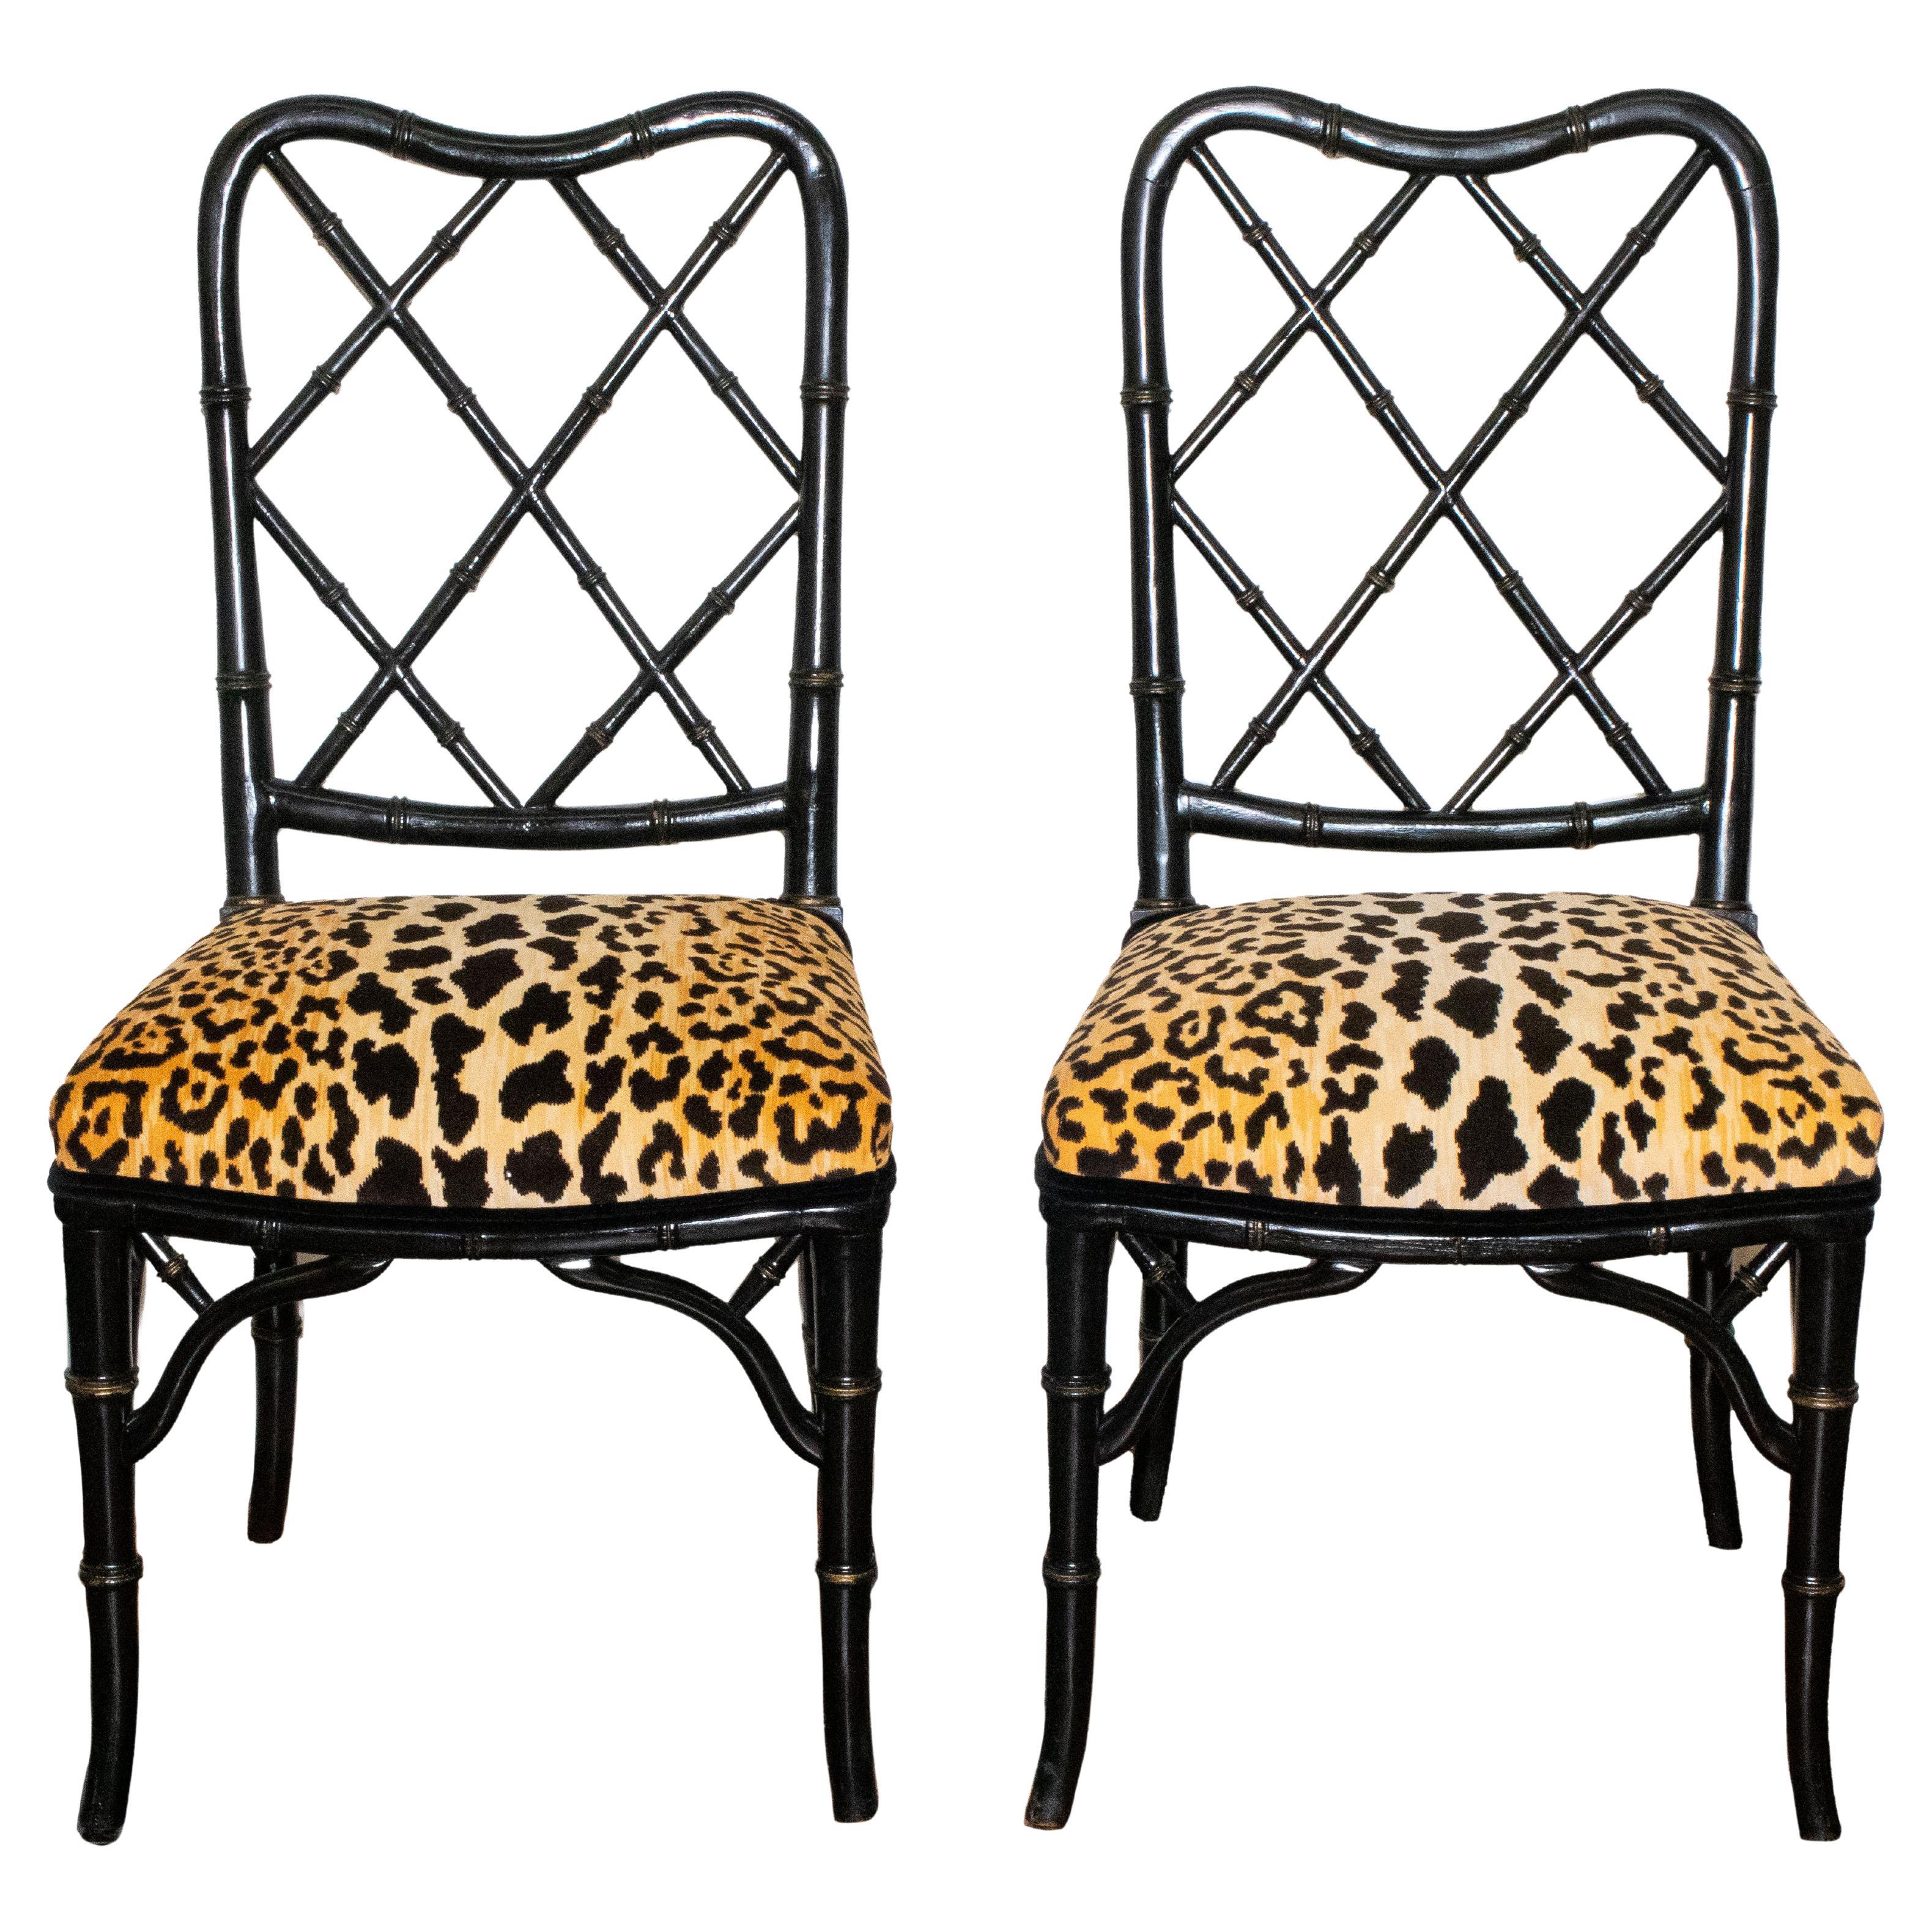 Faux Bamboo Chairs in Leopard Upholstery